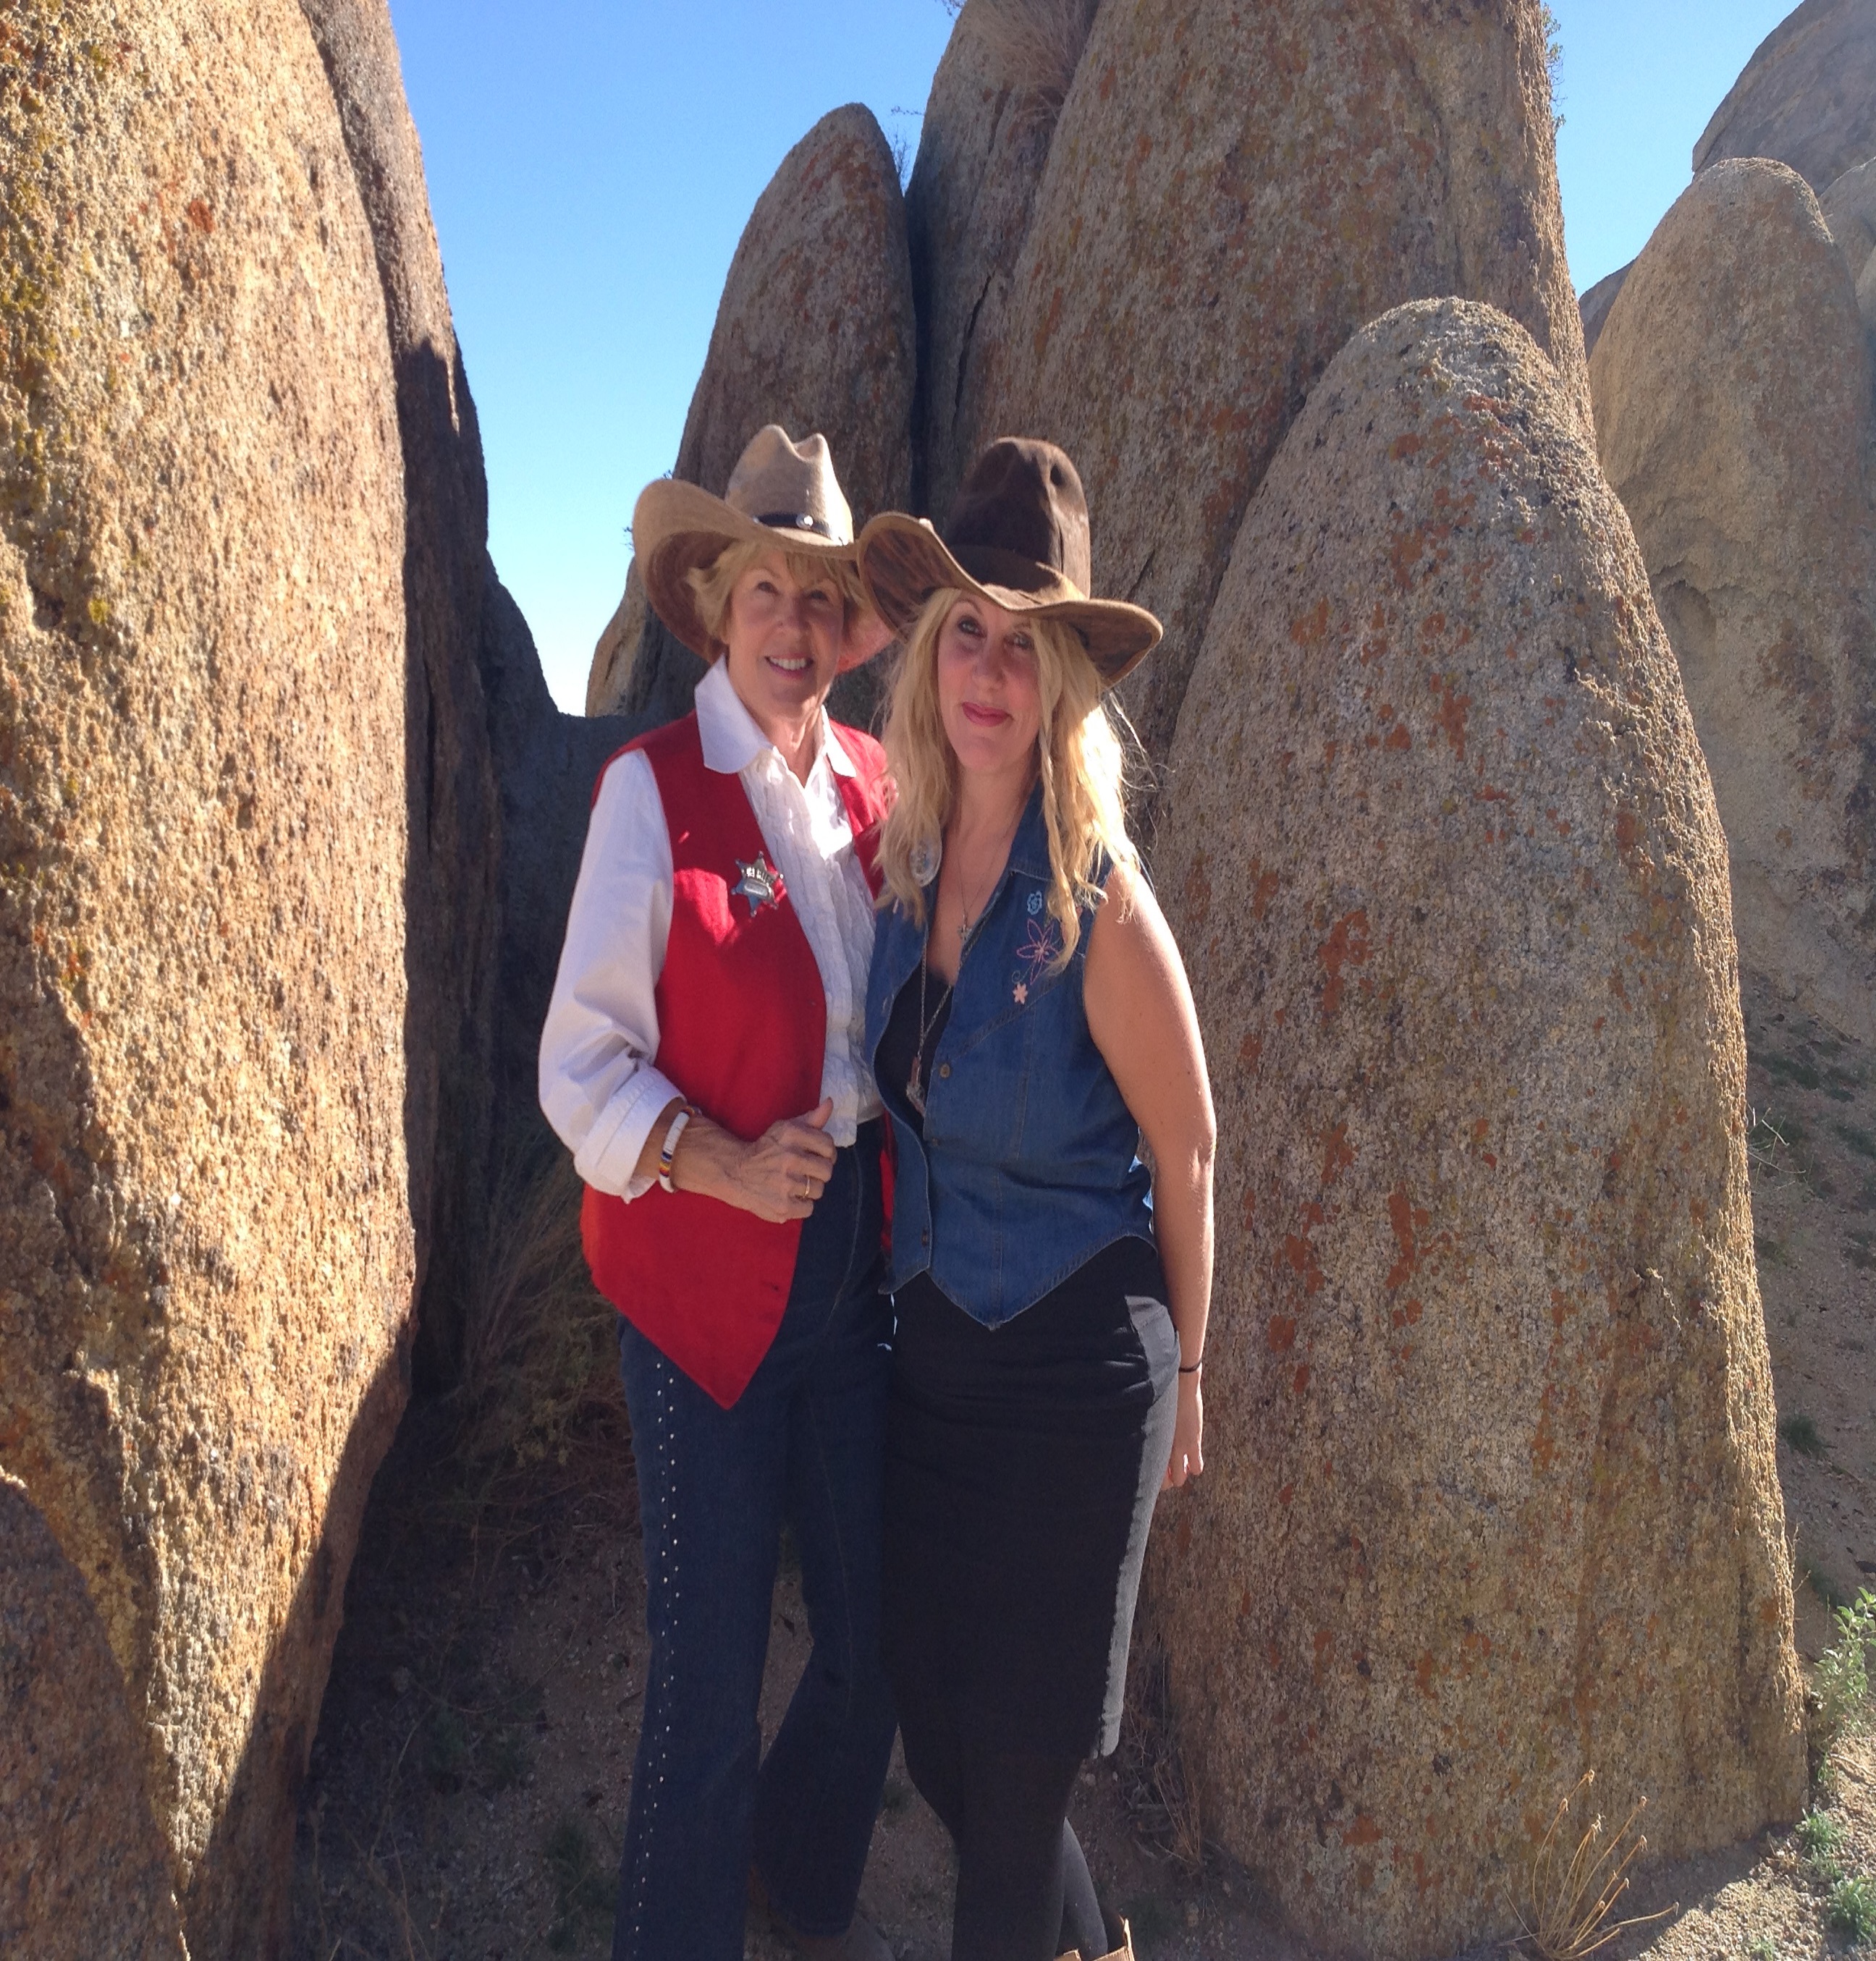 Amy Goodrich & Sandy Wise, nestled within the Alabama Hills, Lone Pine California. Attending the screening of the documentary 'Brotherhood of the Popcorn' at Lone Pine Film Festival, October 2014